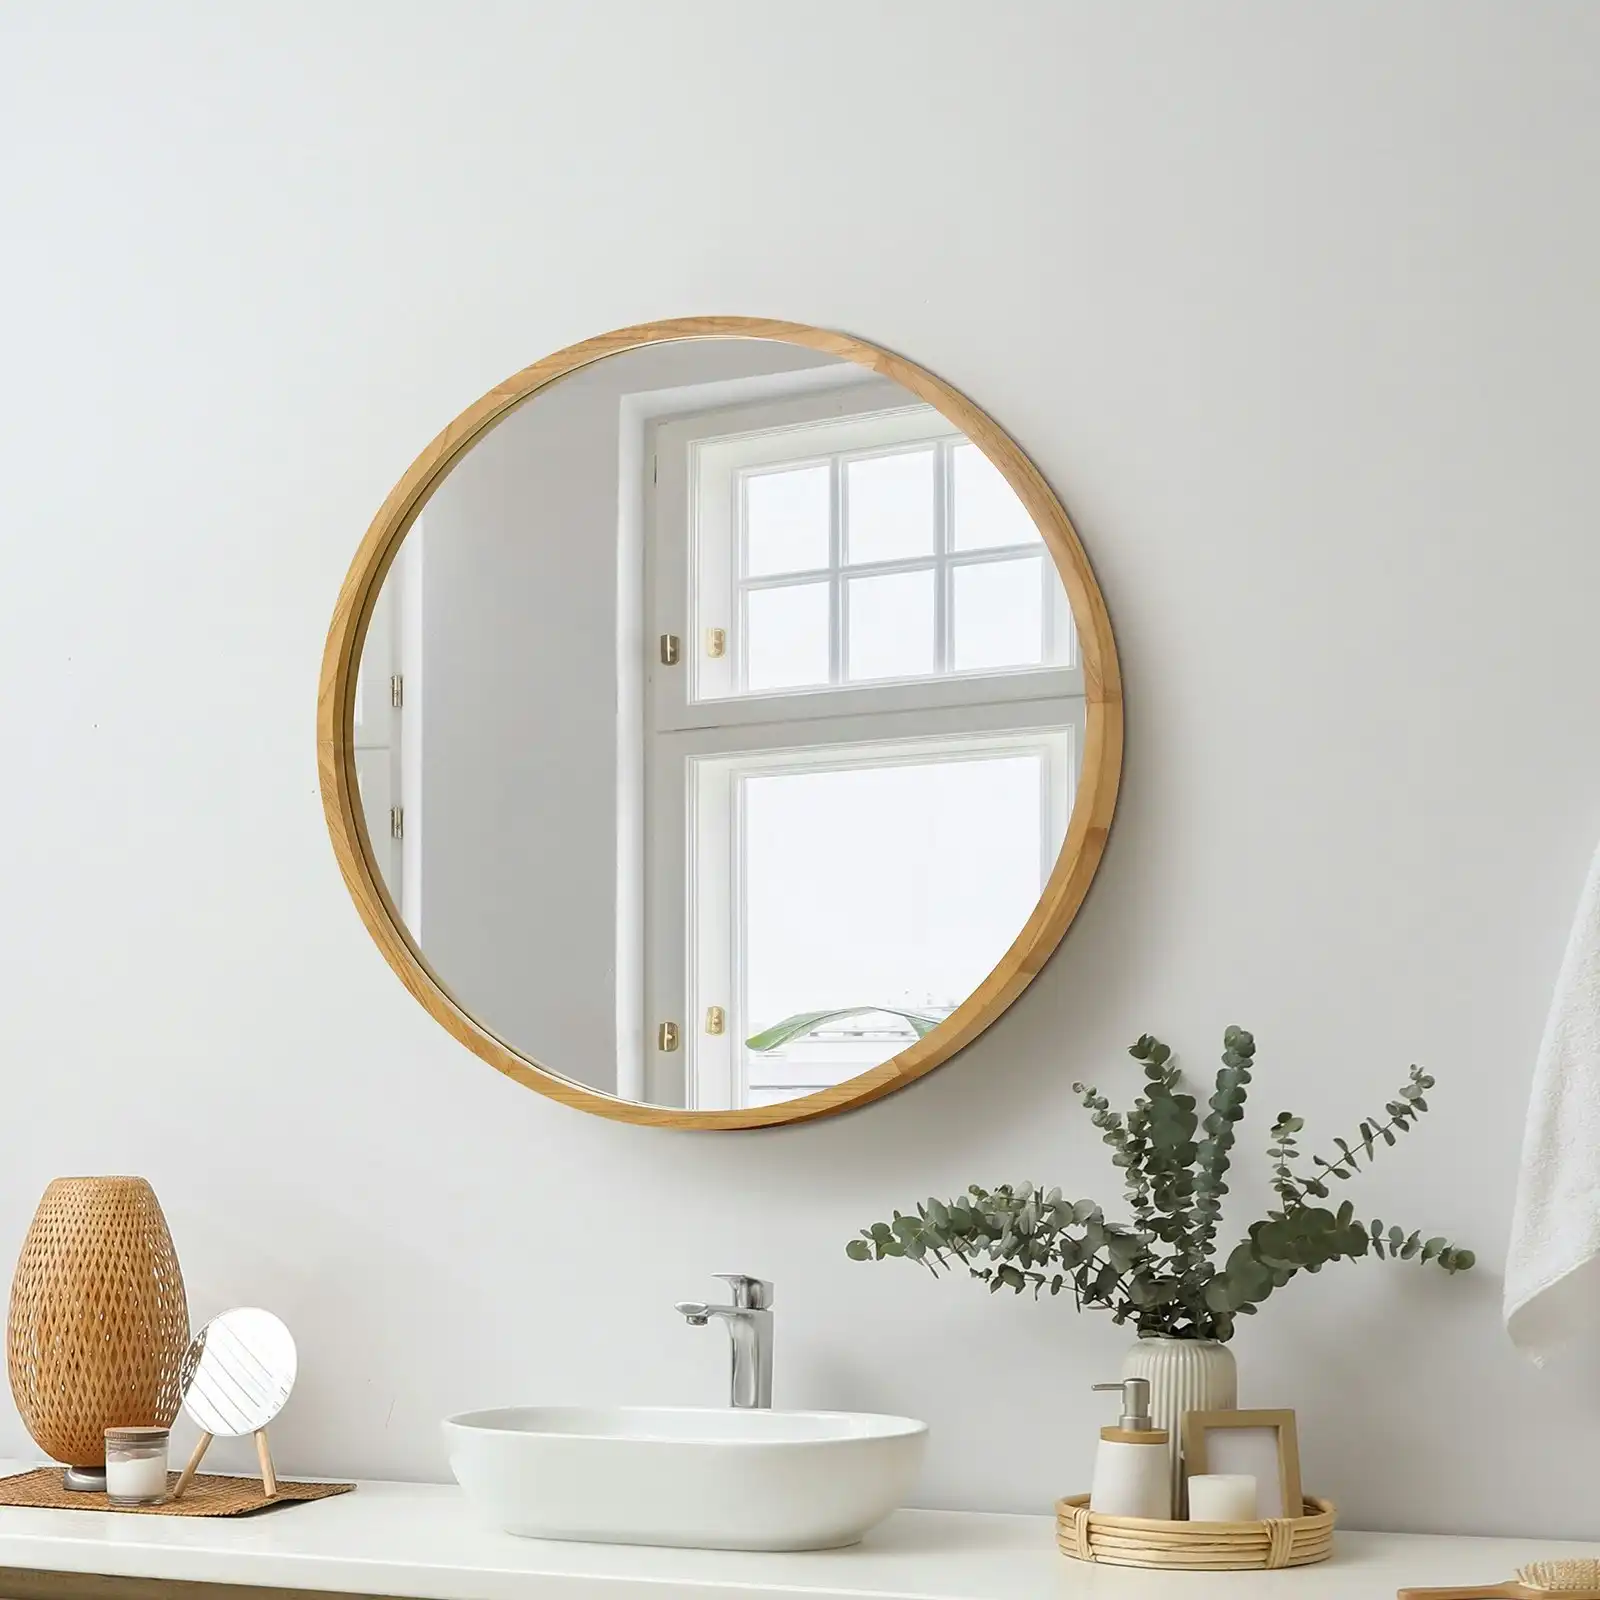 Oikiture Wall Mirrors Round Makeup Mirror Vanity Home Decro 50cm Wooden